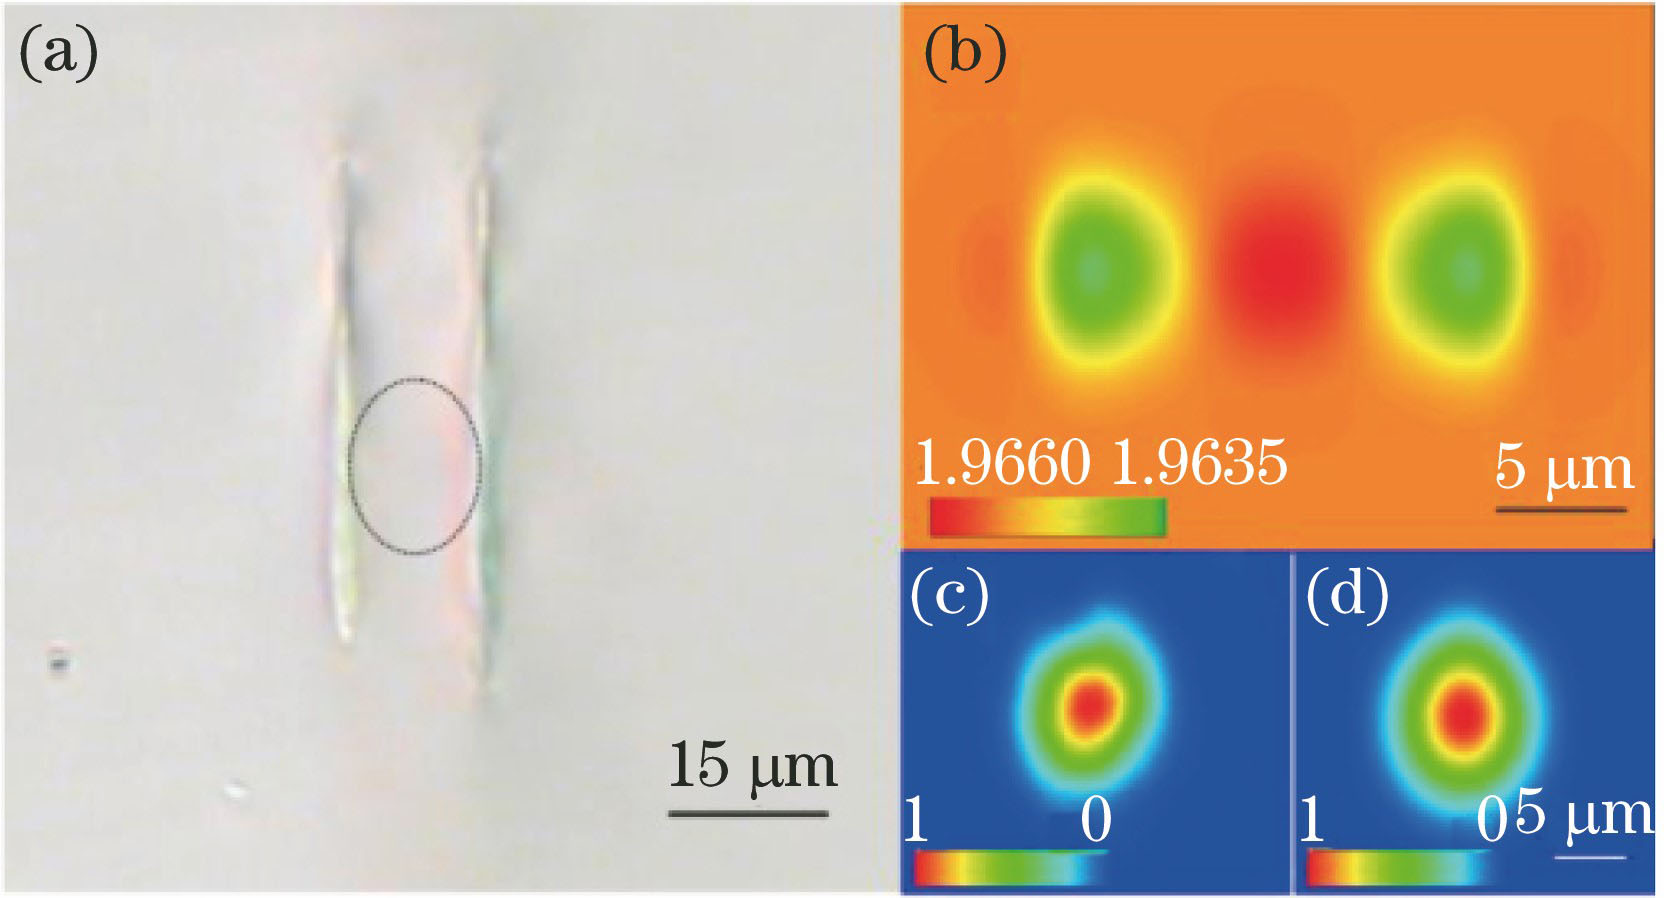 Dual-line waveguides in Nd∶GGG crystals. (a) Microscopic image of dual-line waveguide in Nd∶GGG crystals fabricated by femtosecond laser; (b) simulated refractive-index profile at end-face of waveguide; (c)(d) measured and calculated mode profiles at wavelength of 632.8 nm, respectively[74]